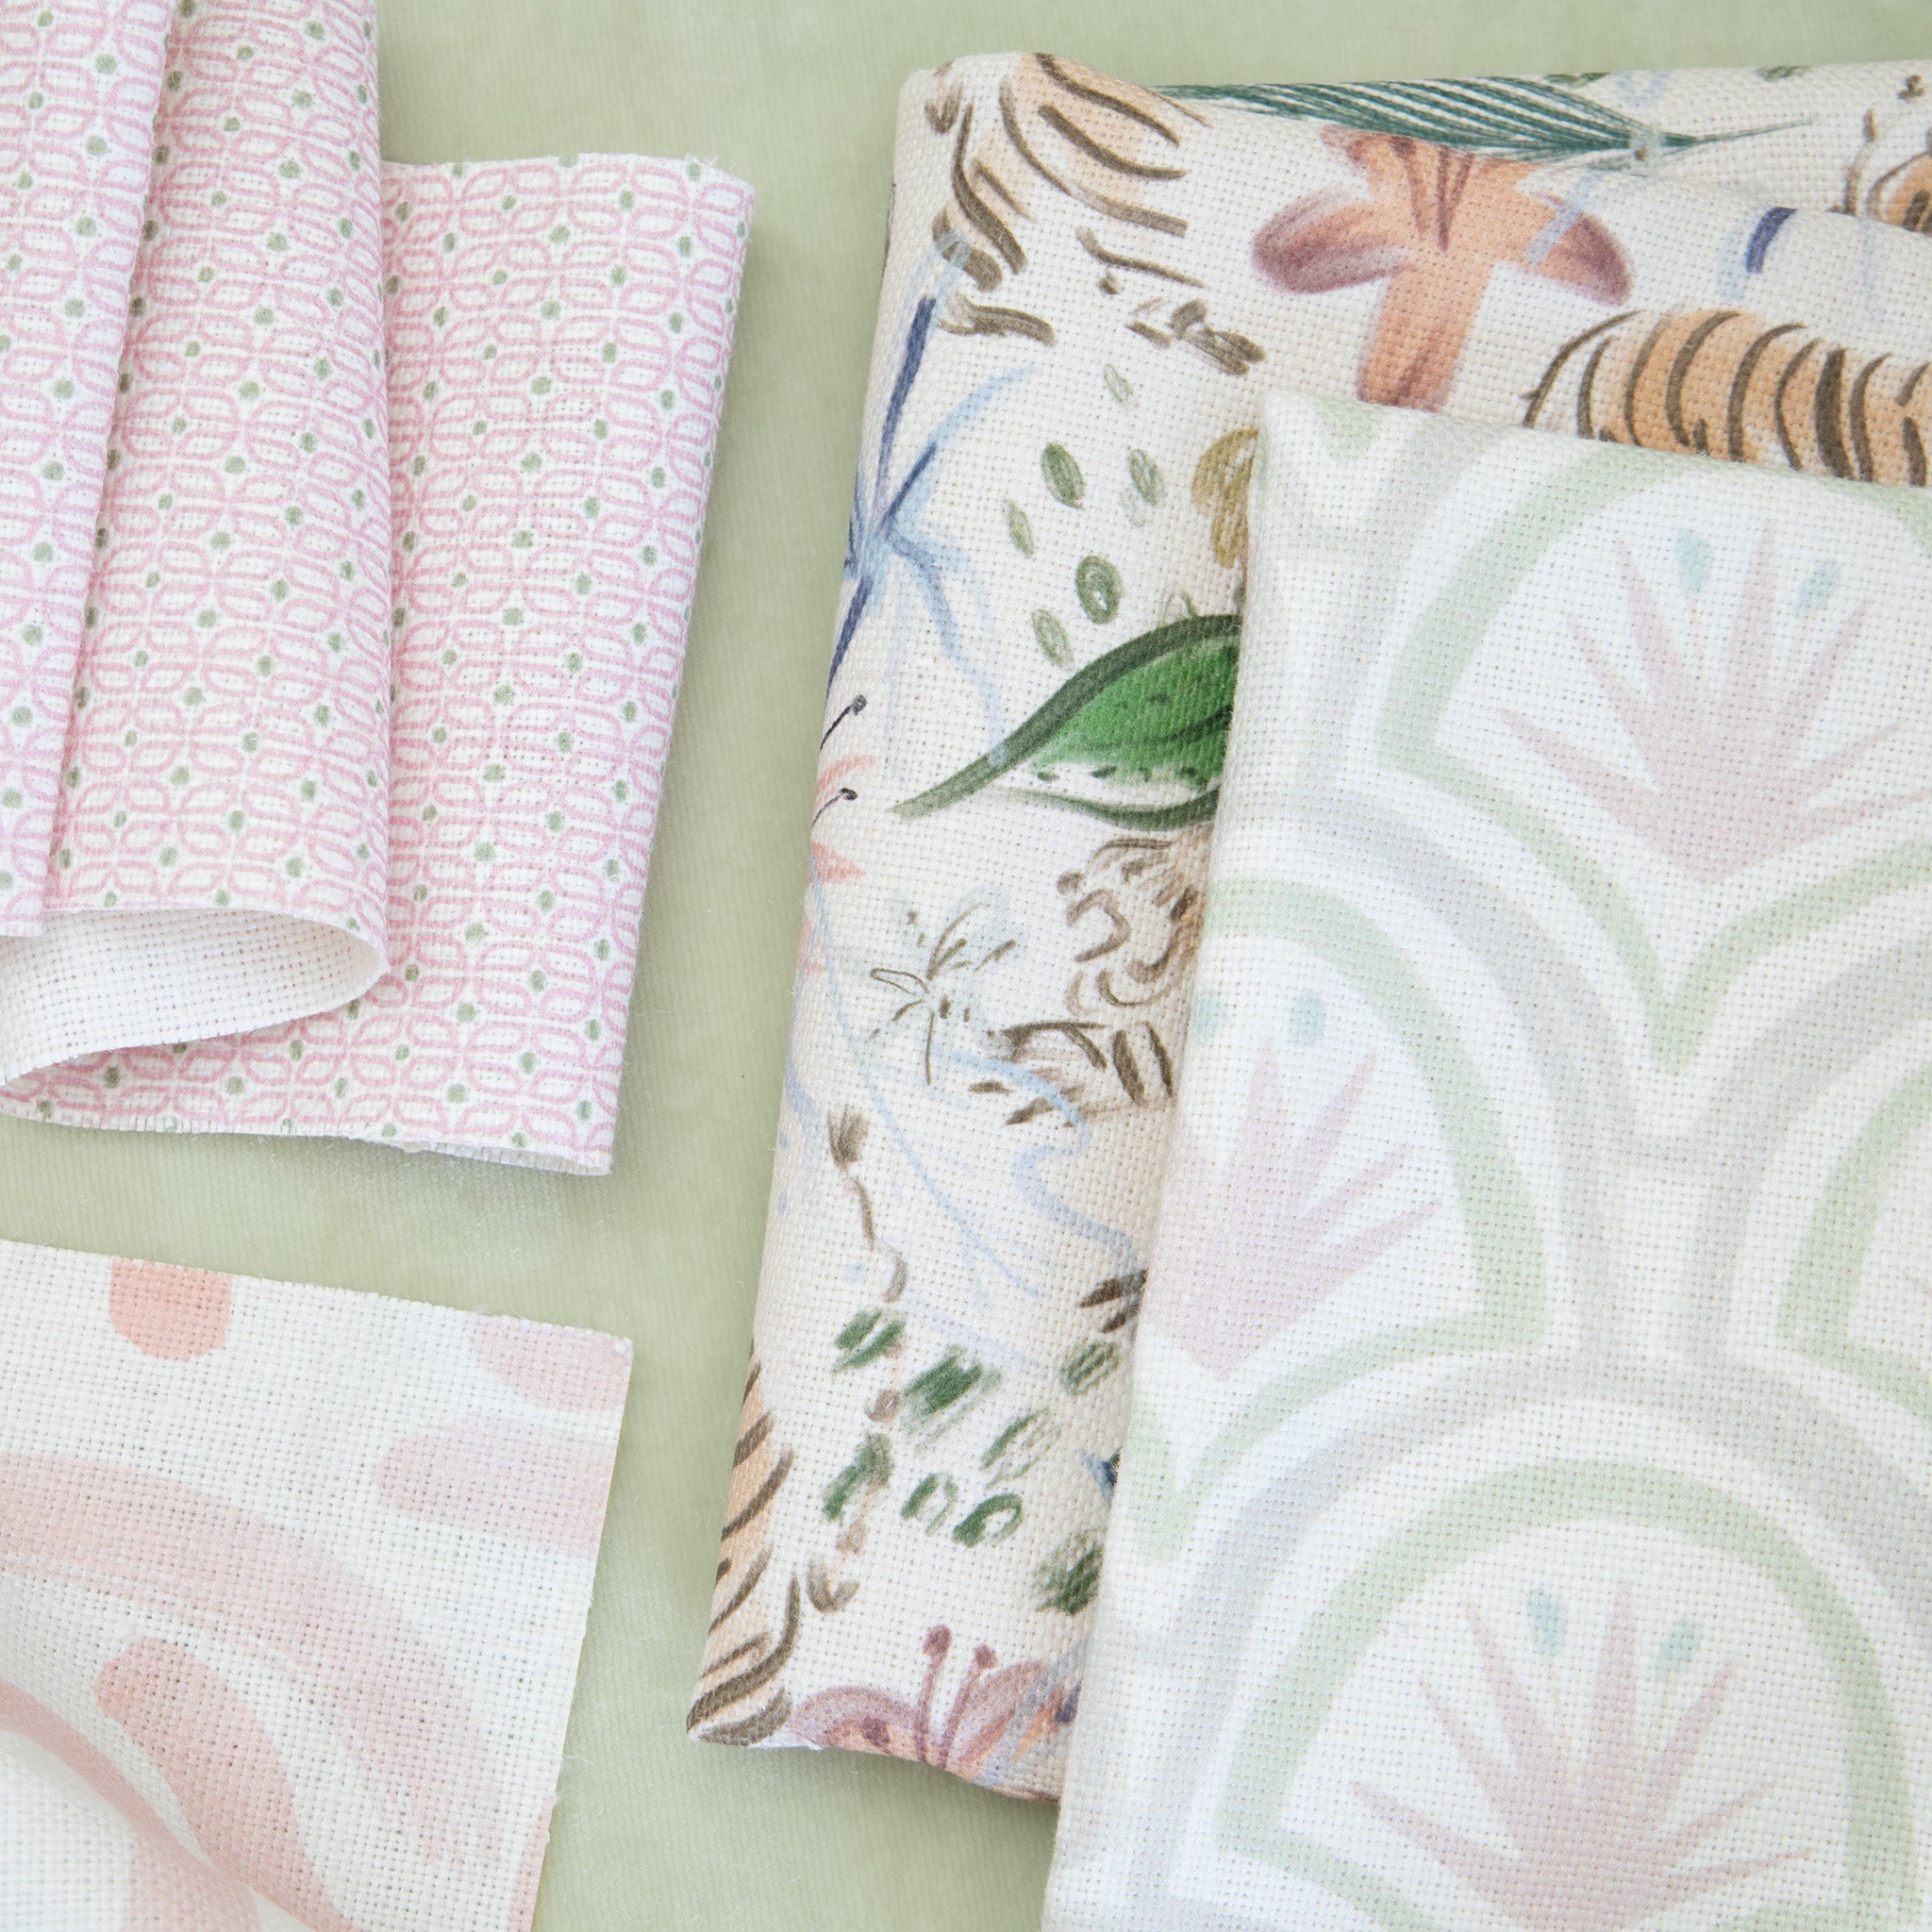 Close-up of interior design moodboard and fabric inspirations with Pink Chinoiserie Tiger Printed Linen Swatch, Pink Art Deco Palm Printed Linen Swatch, Pink Geometric Printed Linen Swatch, and Pink Graphic Linen Swatch